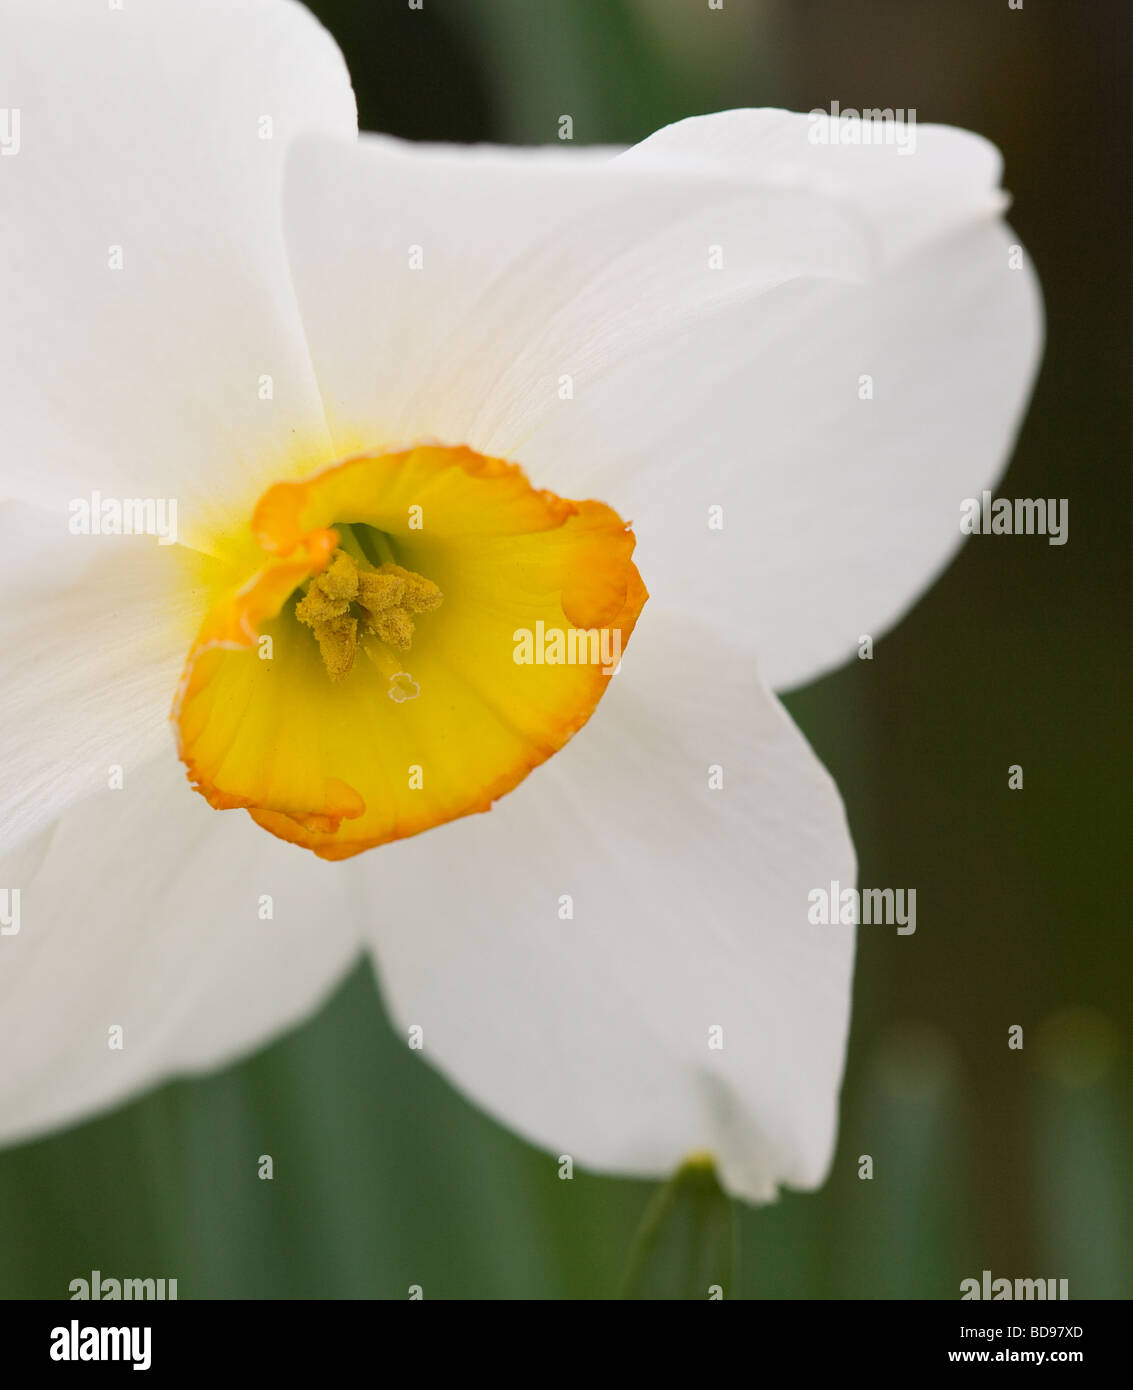 Eggy Daffodil. A whilte daffodil with a yellow centre.. Small-cupped Daffodil Narcissus Royal Princess. Stock Photo